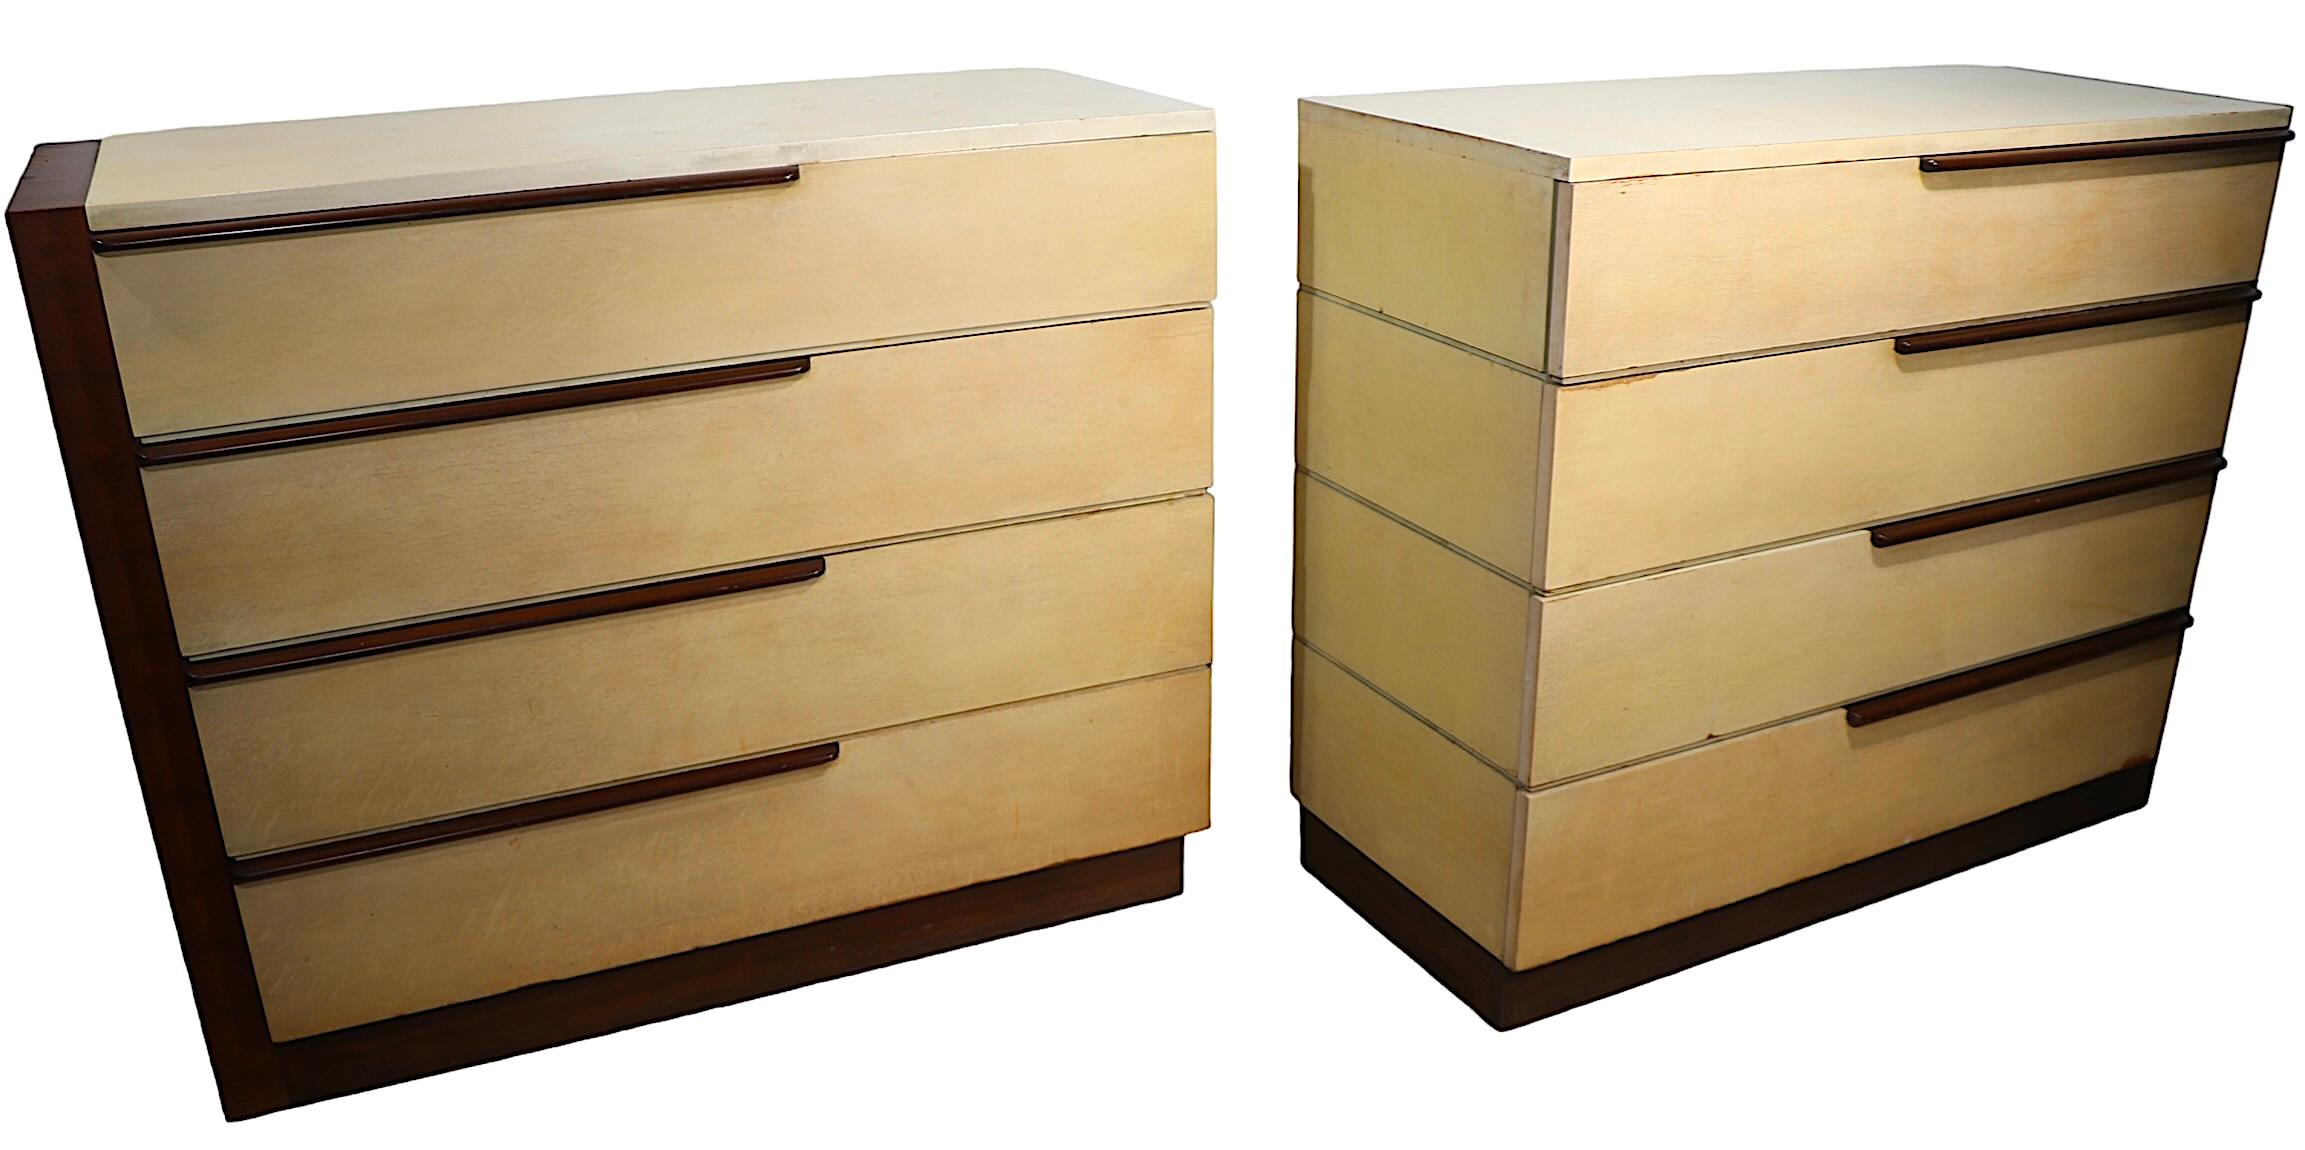 Mid-20th Century Pr Art Deco Art Moderne Dressers by Gilbert Rohde for Herman Miller c 1930's For Sale